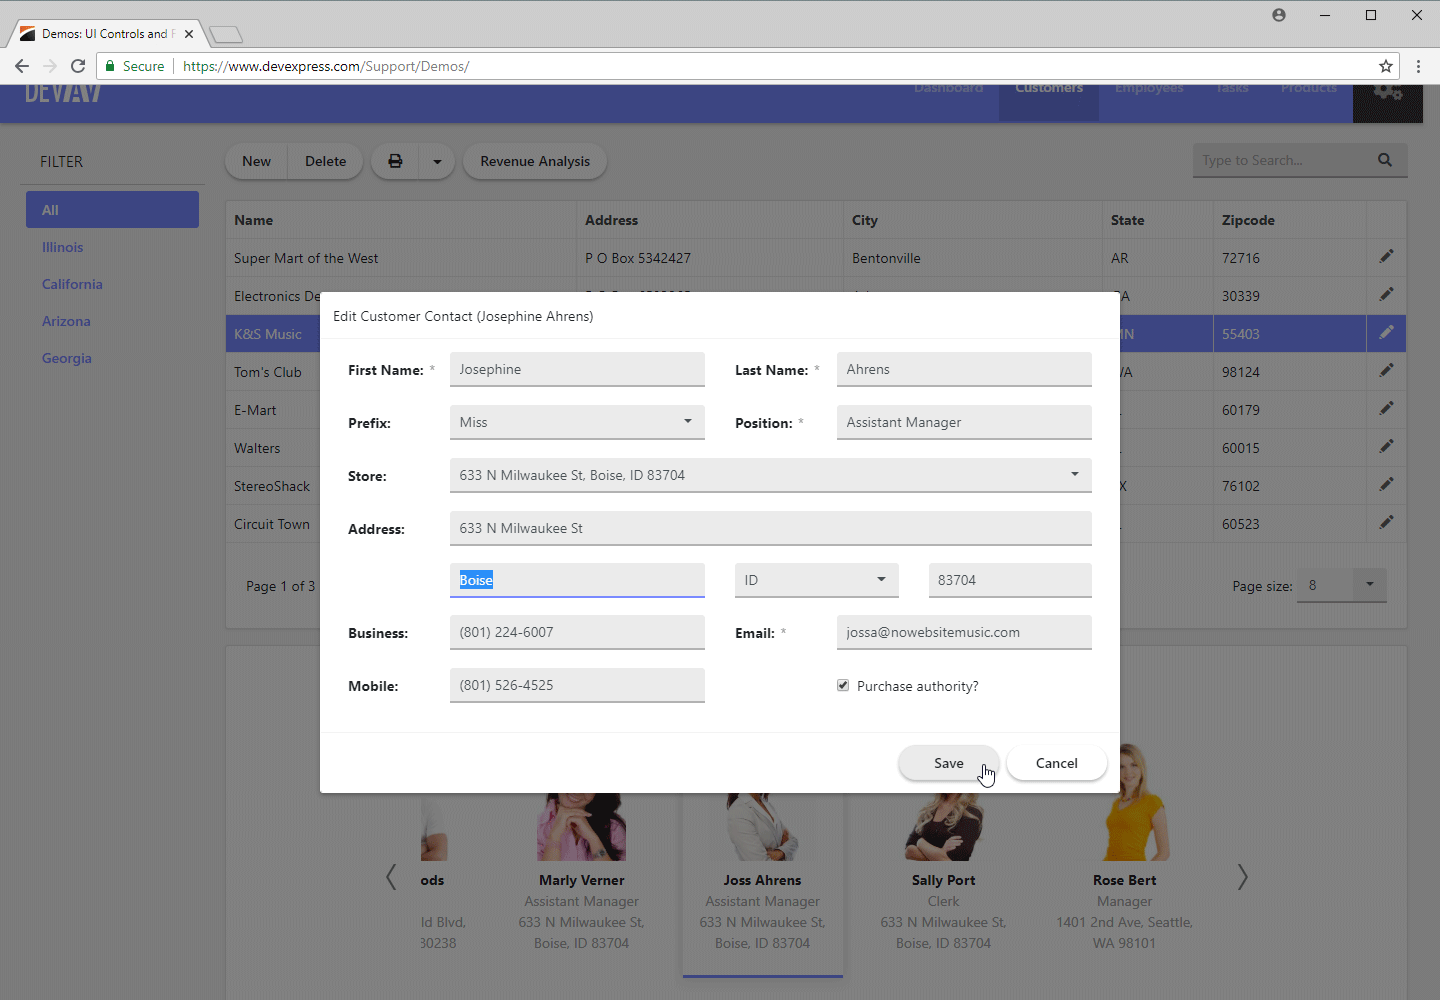 ASP.NET Bootstrap Web Forms App - Automatic Layout in Popup Edit Form